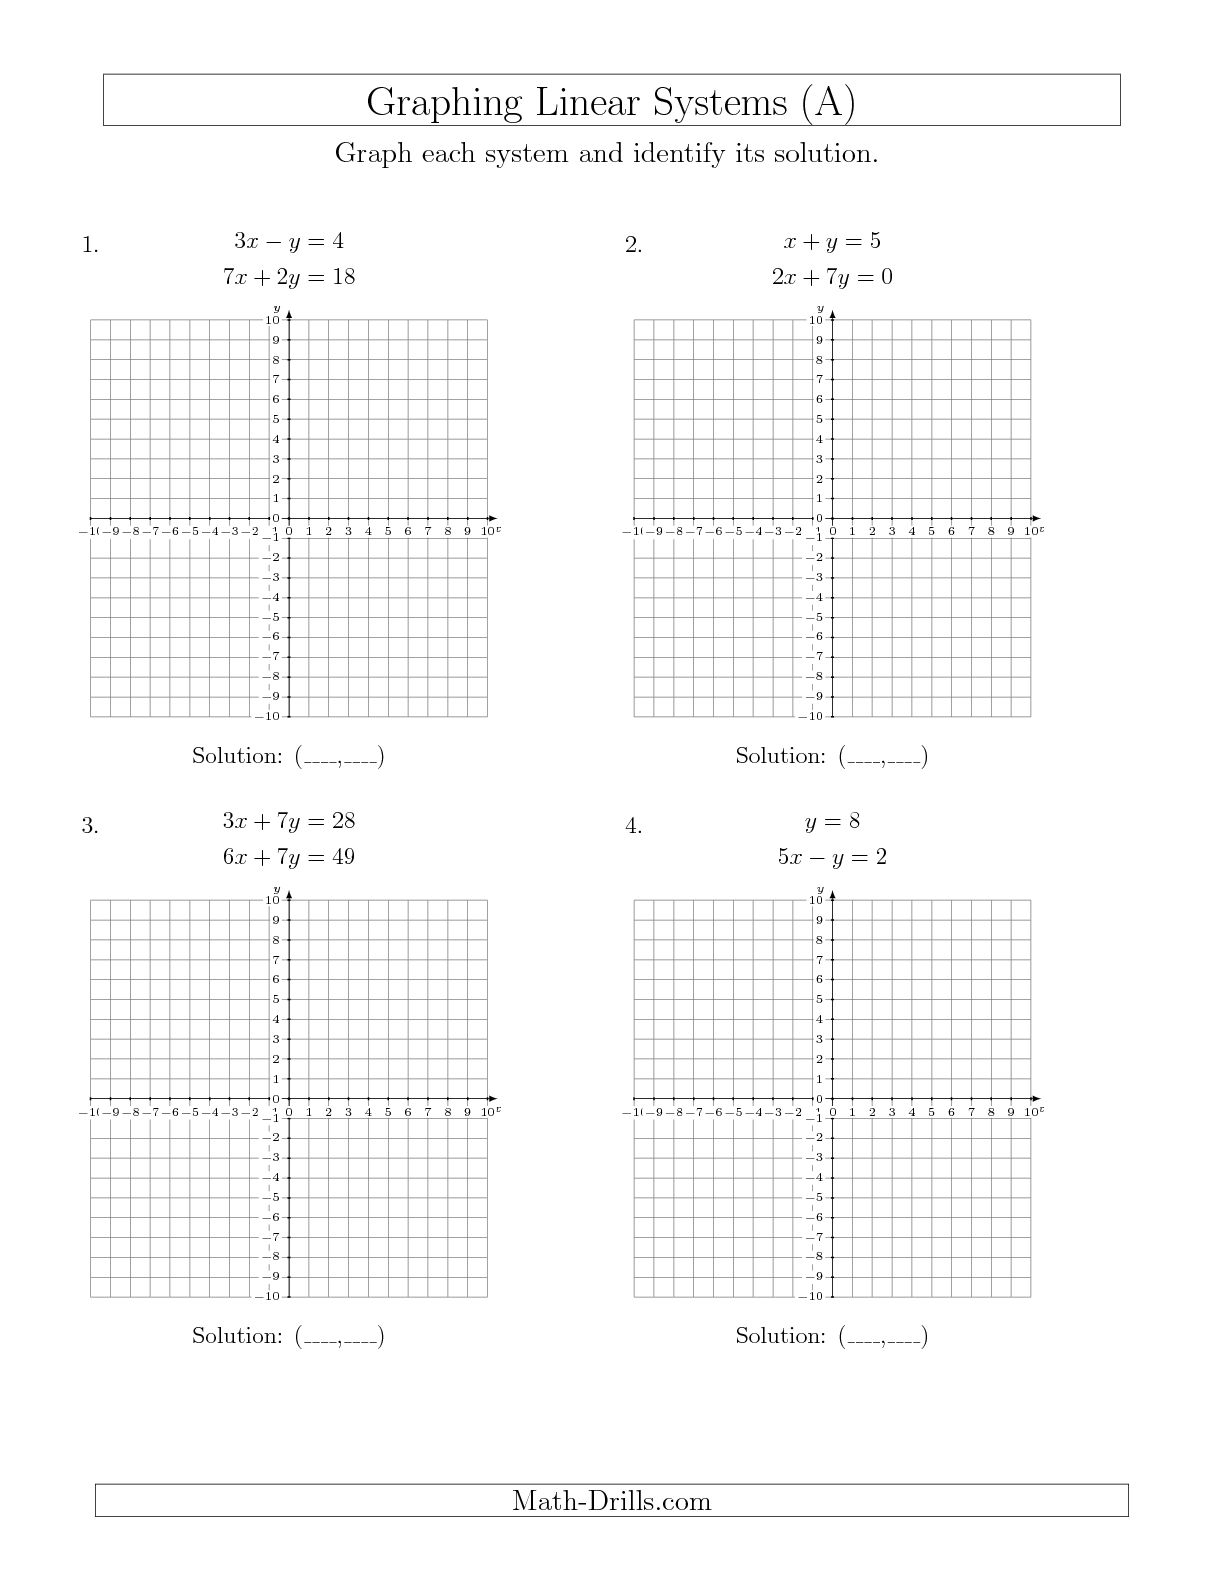 Solving Systems of Linear Equations by Graphing Image